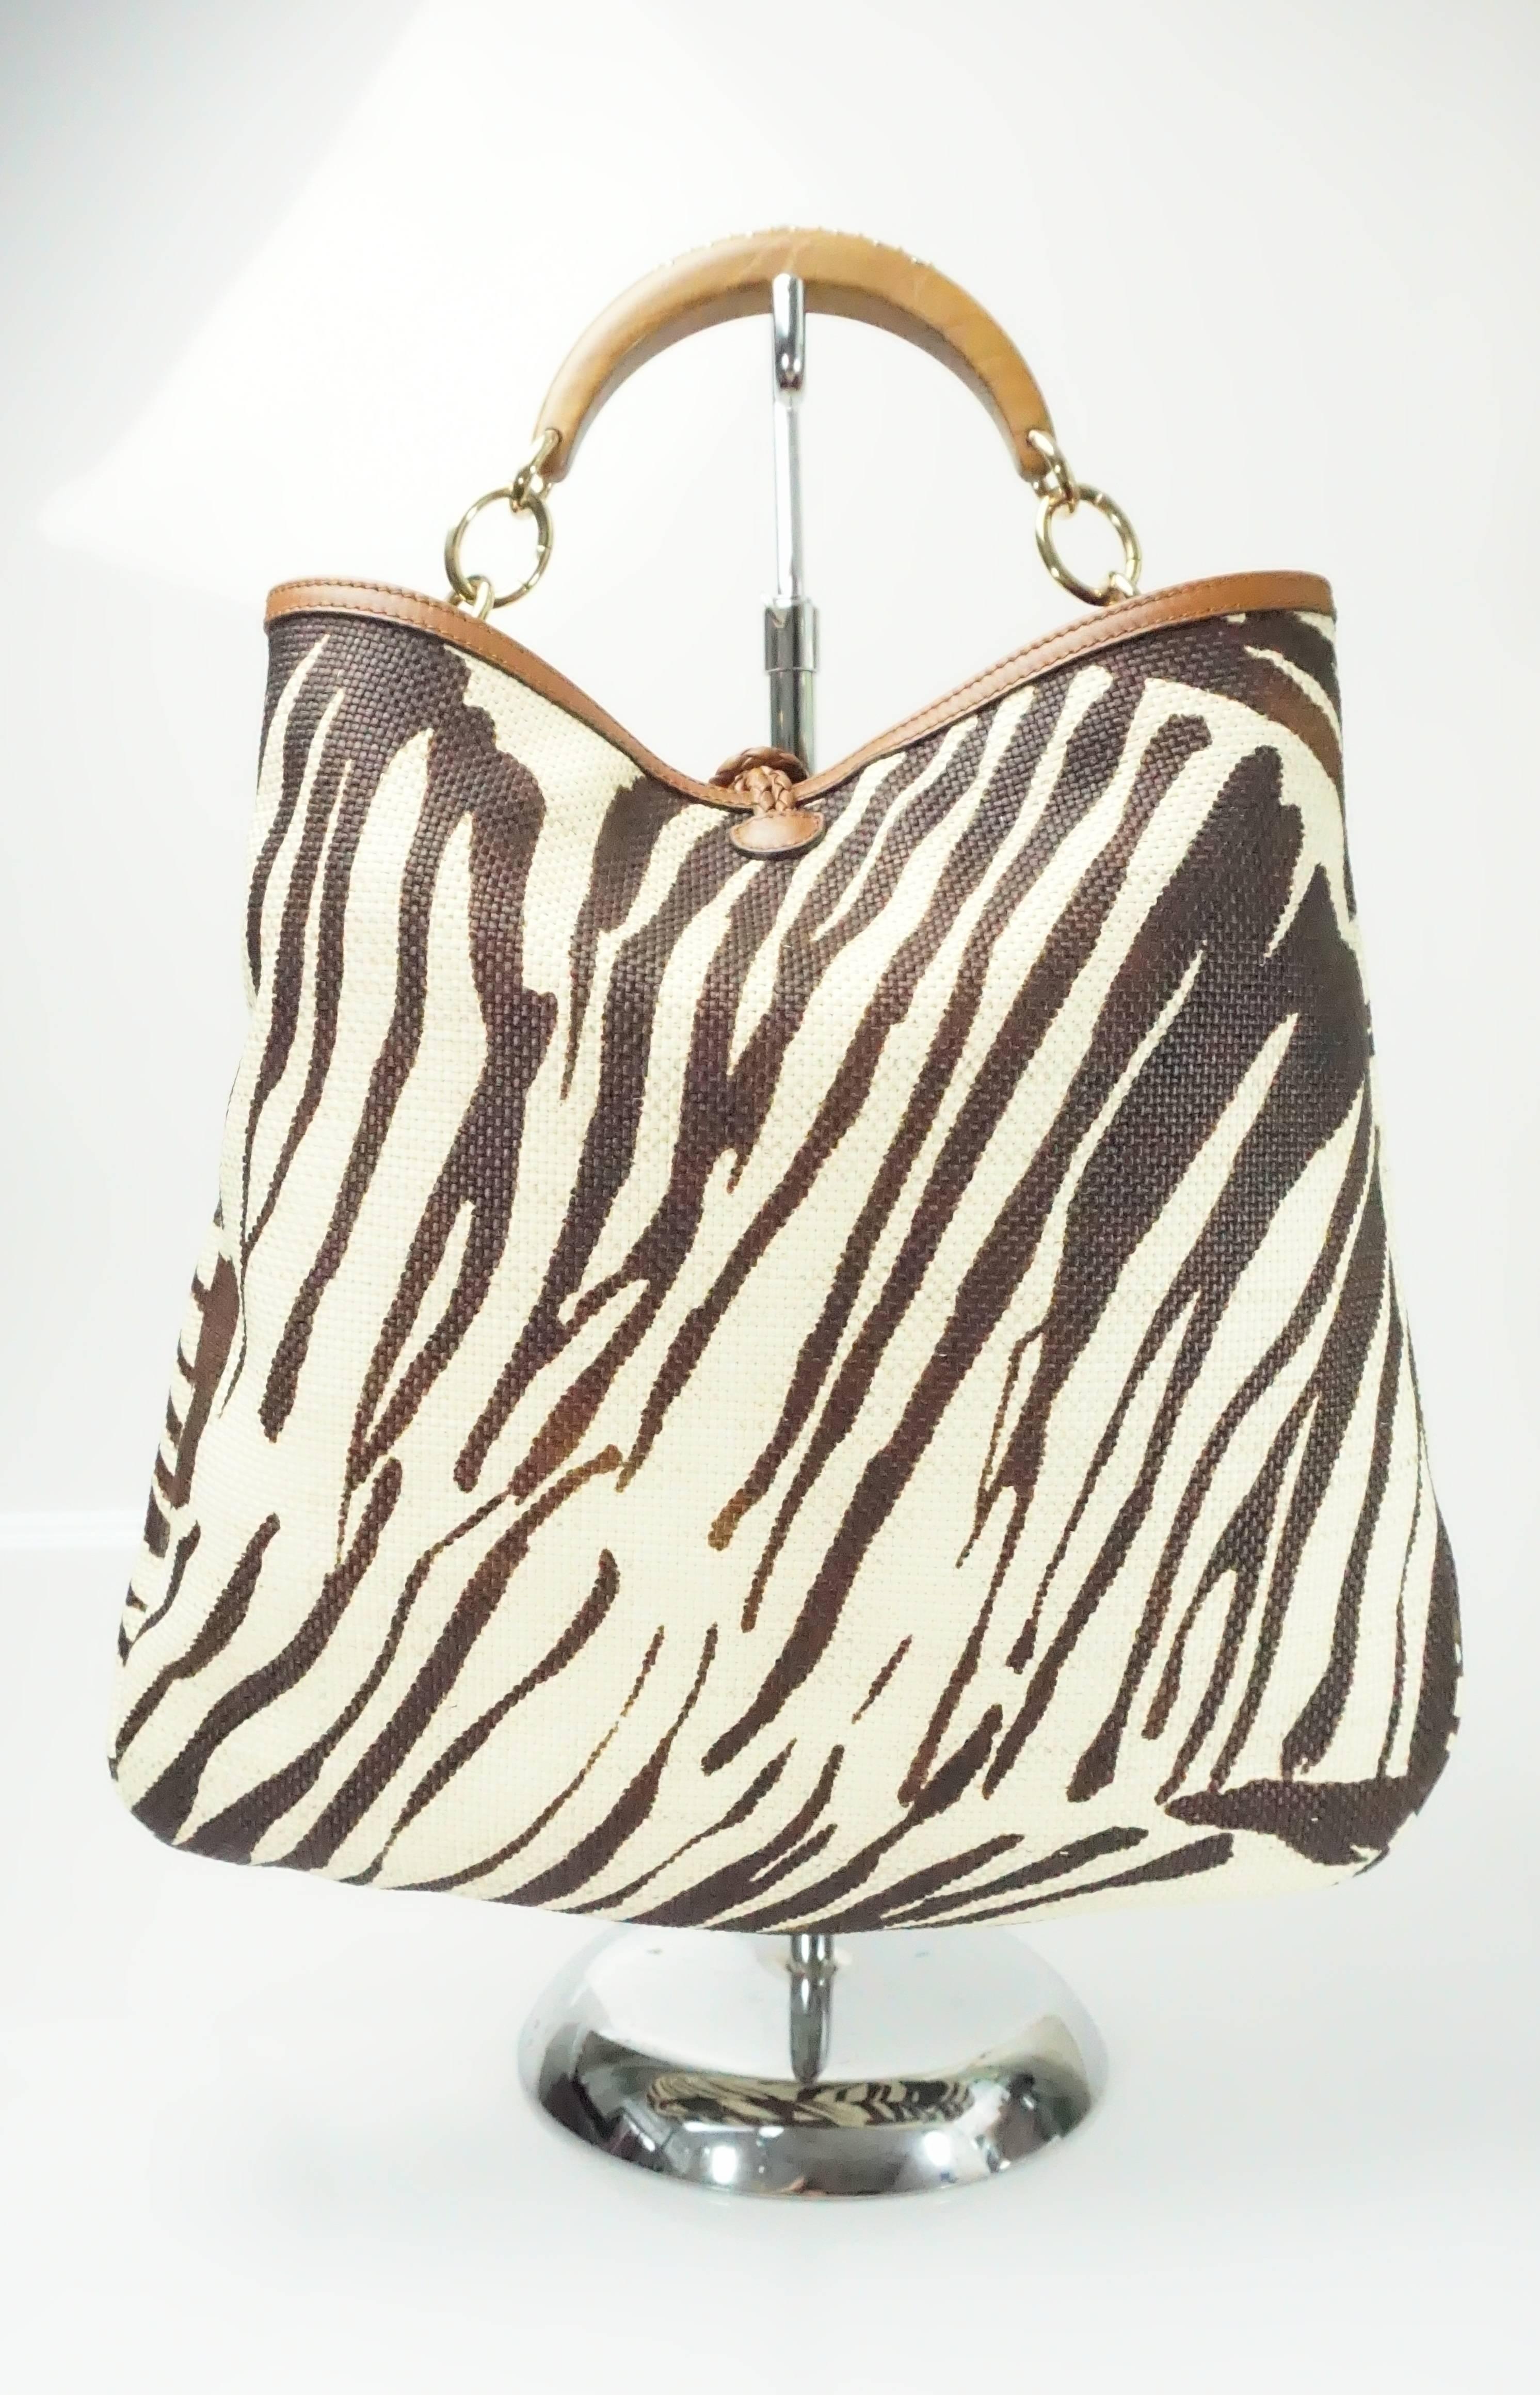 Salvatore Ferragamo Earthtone Zebra Print Rafia Handbag w/ Wood Studded Handle.  This beautiful bag has a brown zebra print design, a short wooden handle with embossed logo and stud details. There is a gold toned metal chain detailing to the handle